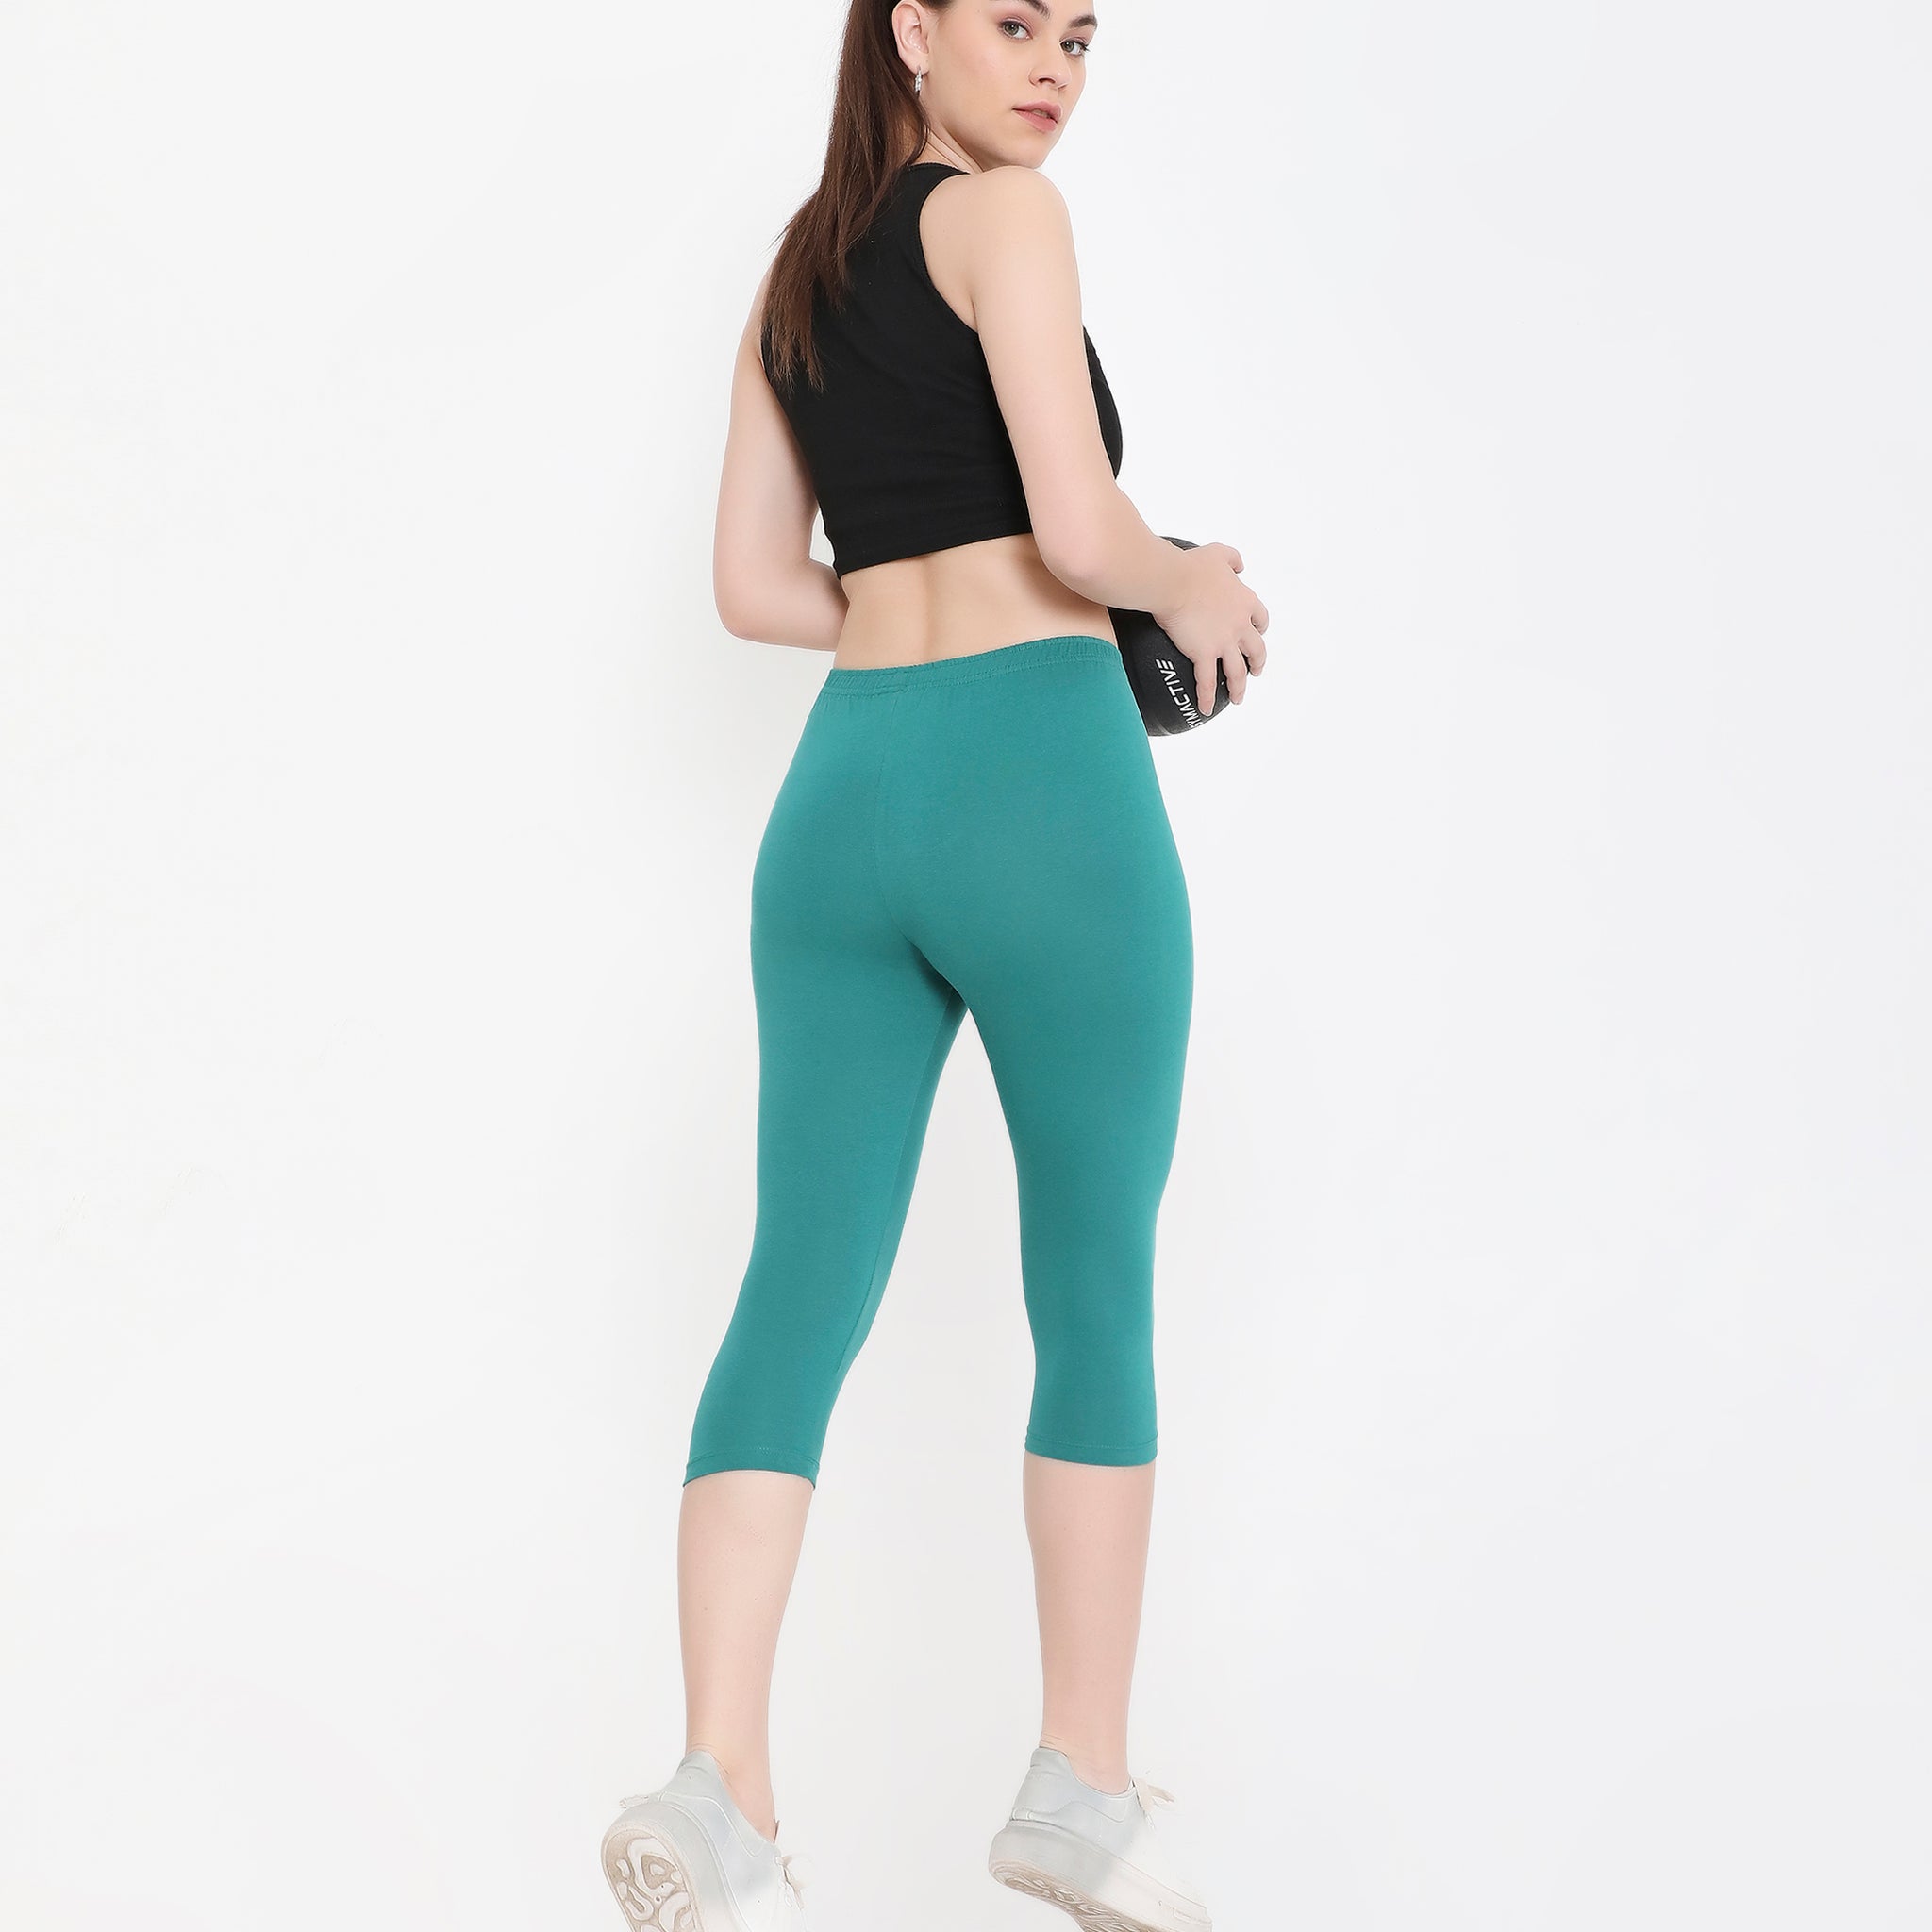 SOLID GREEN SOFT COTTON EVERYDAY CAPRI FOR WOMEN